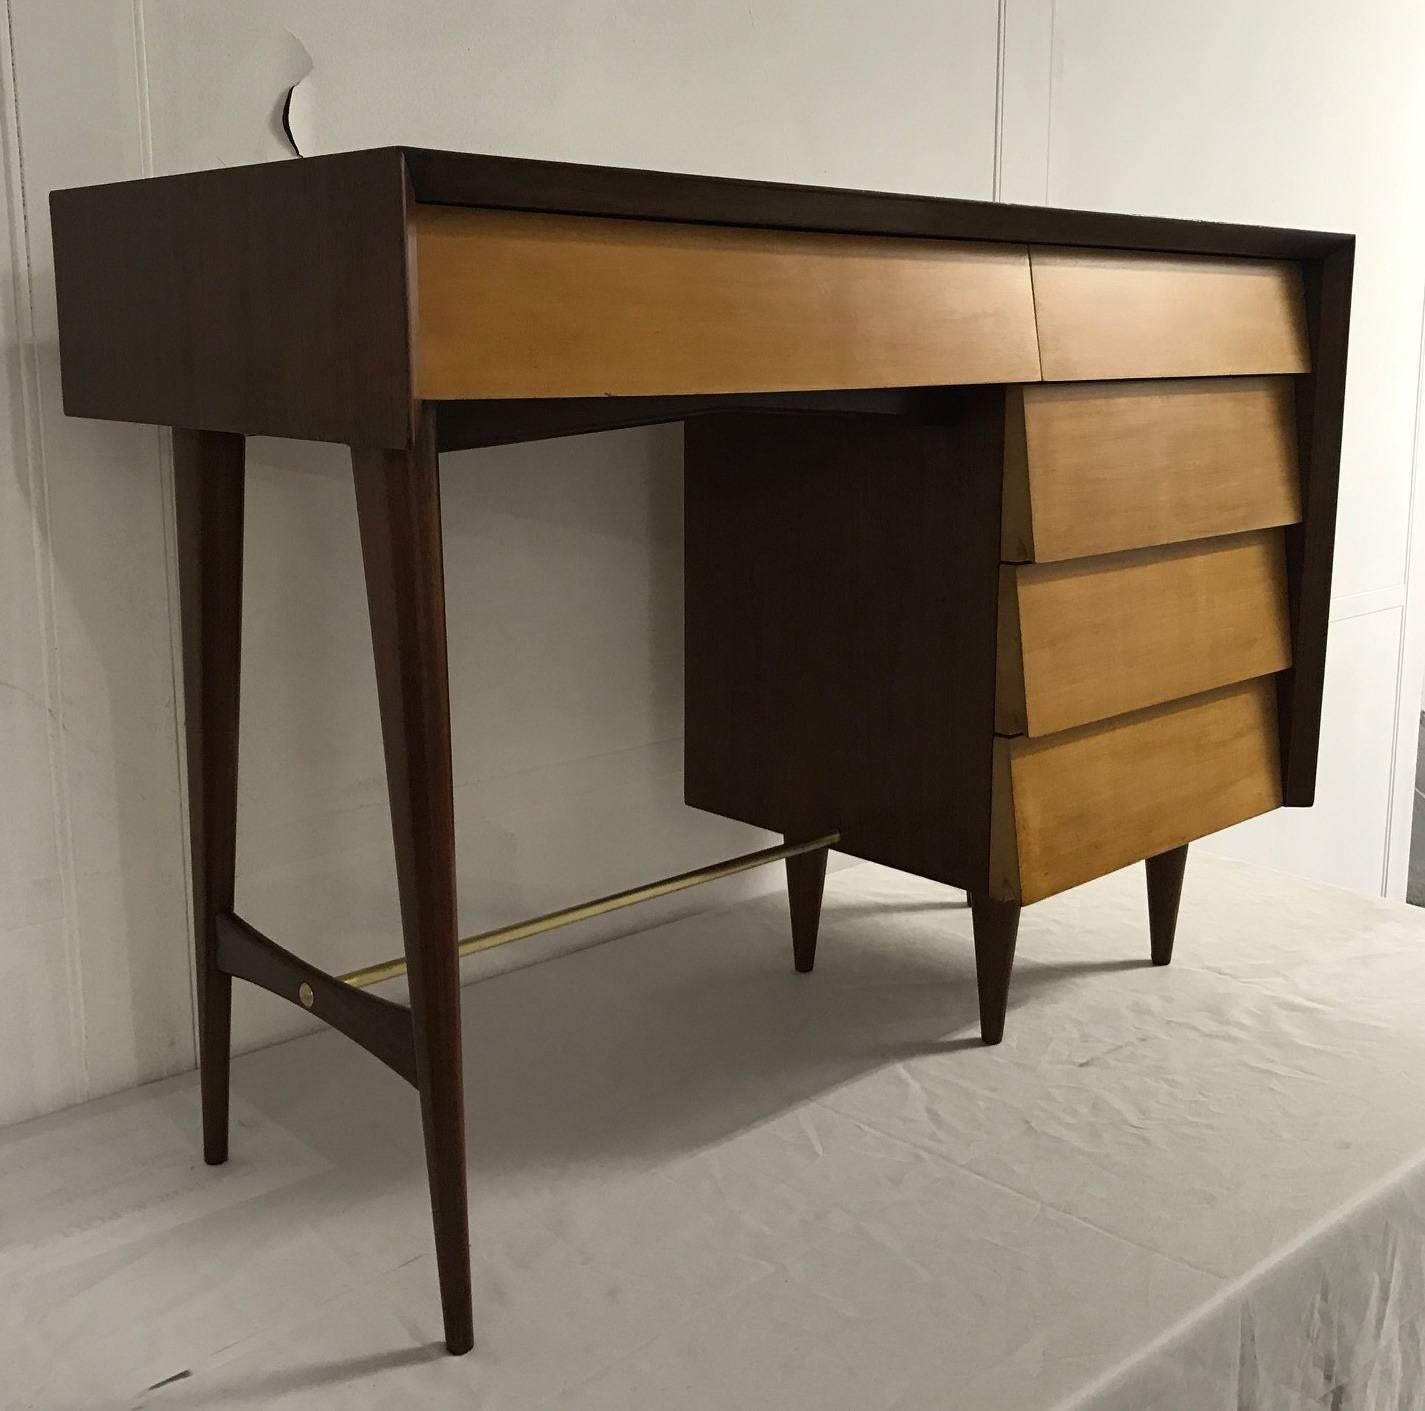 Desk by Olaio, Portugal, 1960s. Five drawers and a brass footrest.